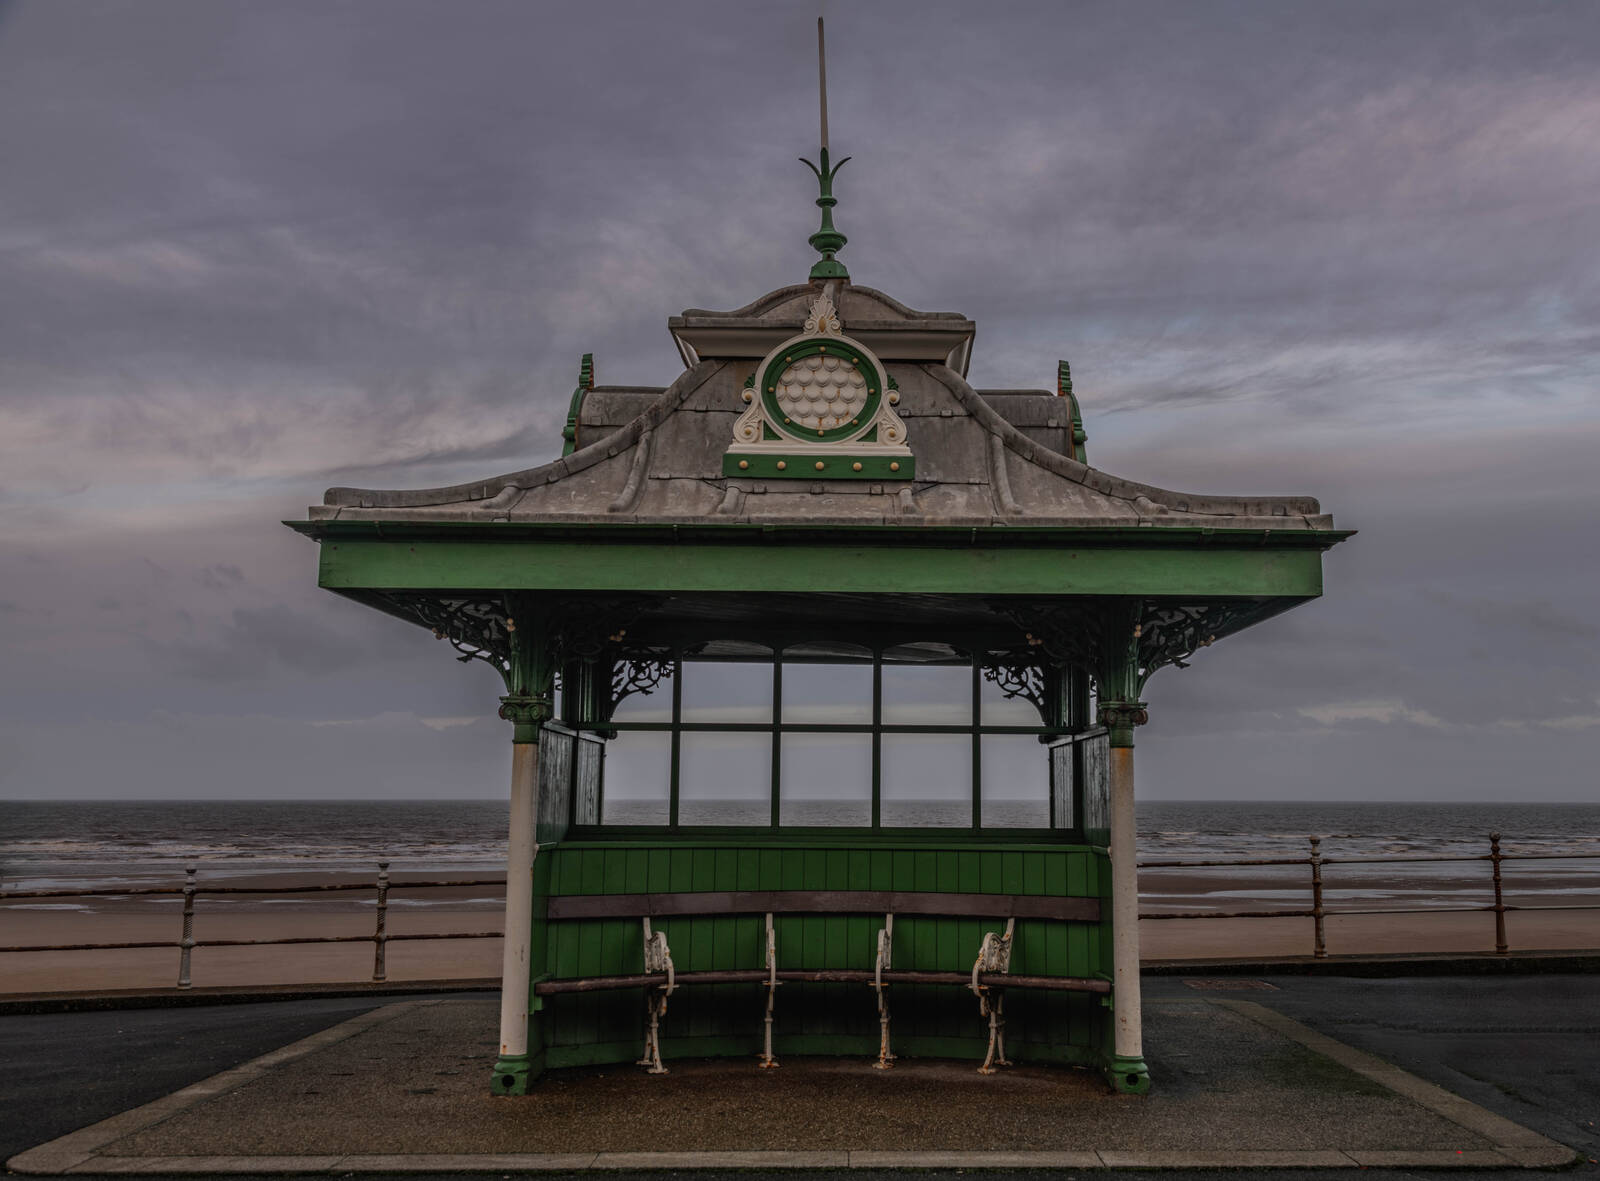 Image of Blackpool Victorian Seaside Shelters by michael bennett